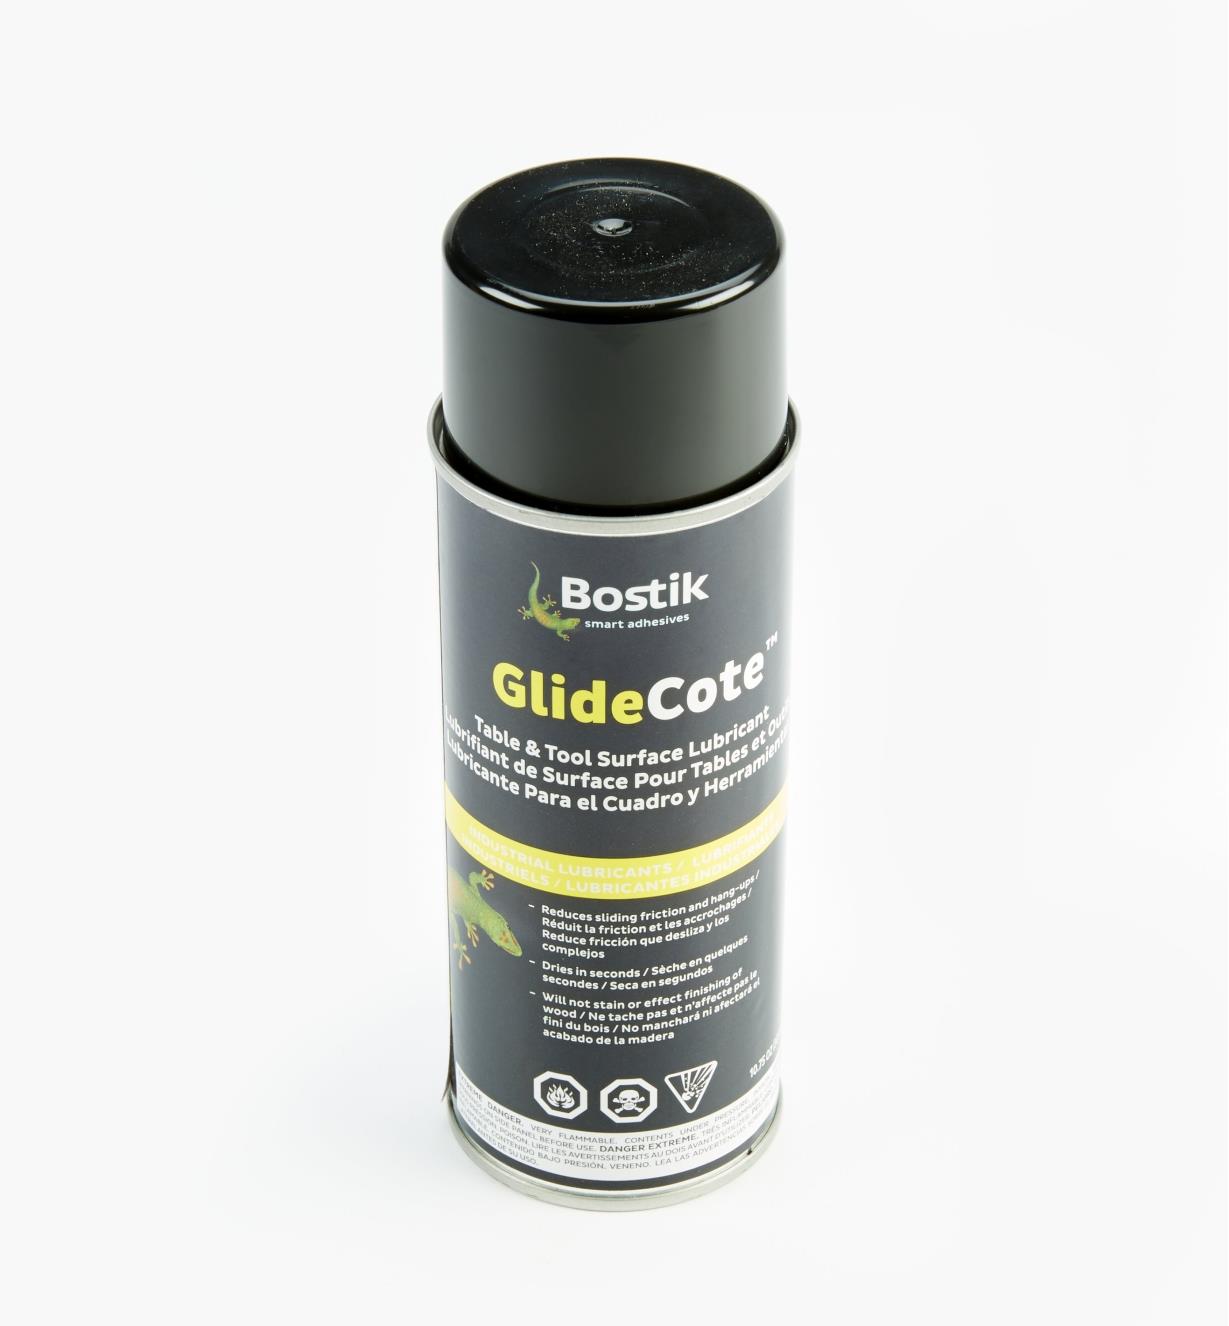 56Z4410 - GlideCote Table & Tool Surface Sealant